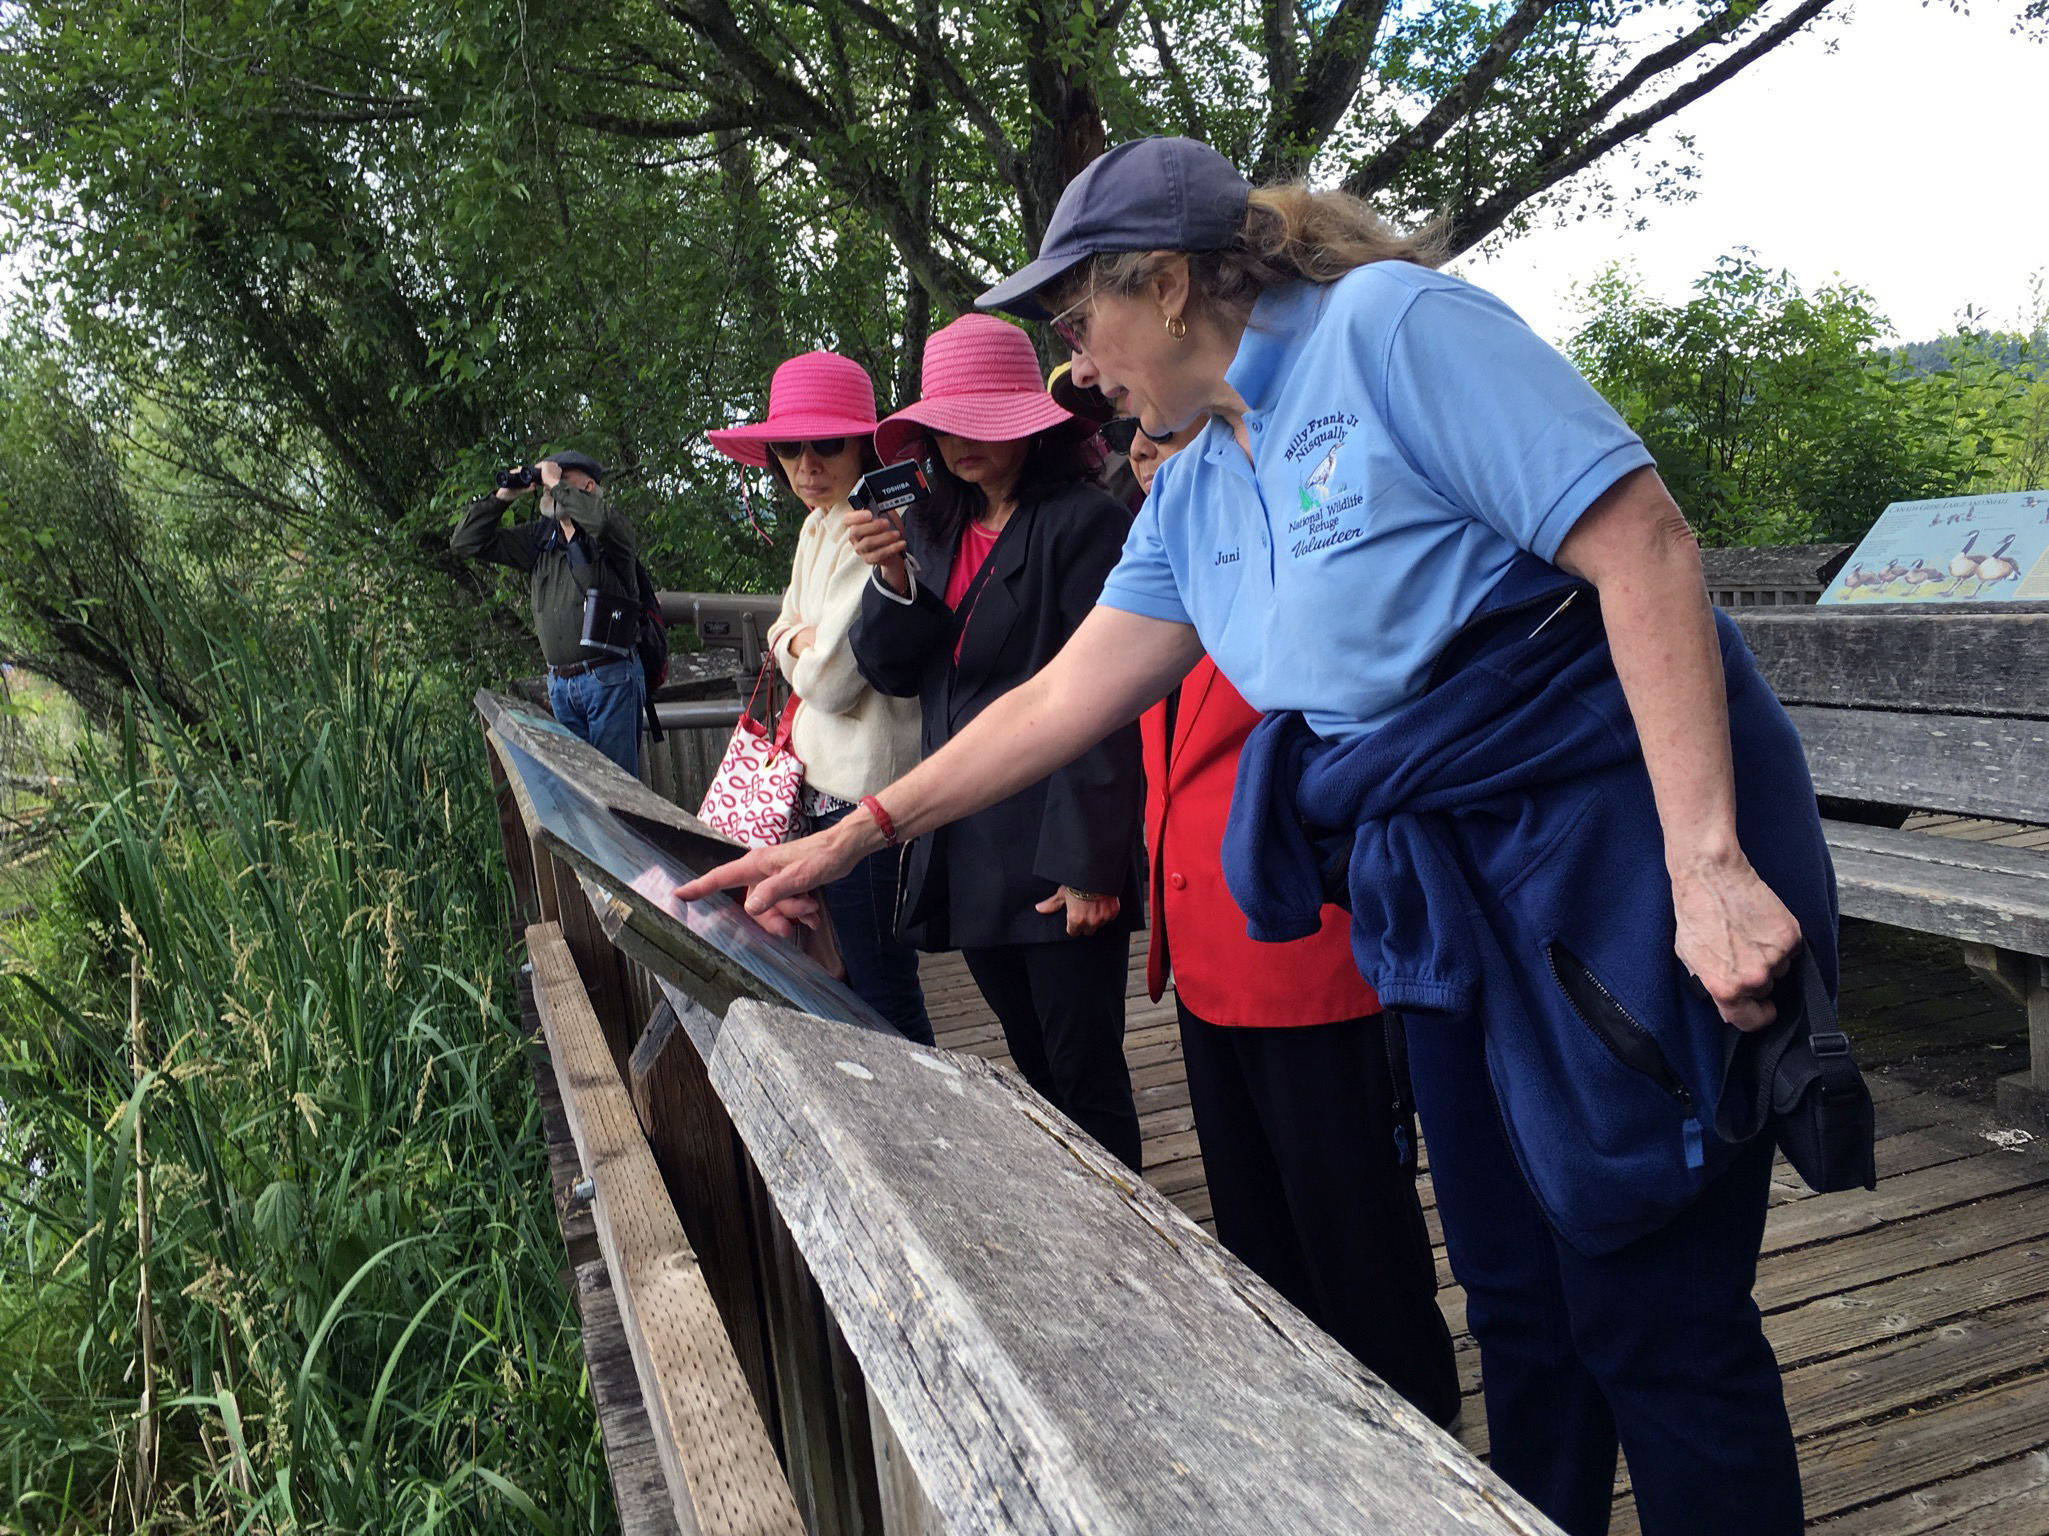 A woman in volunteer clothing points to a sign while 3 women in sunhats look, all standing on boardwalk, with a person viewing something through binoculars behind them.